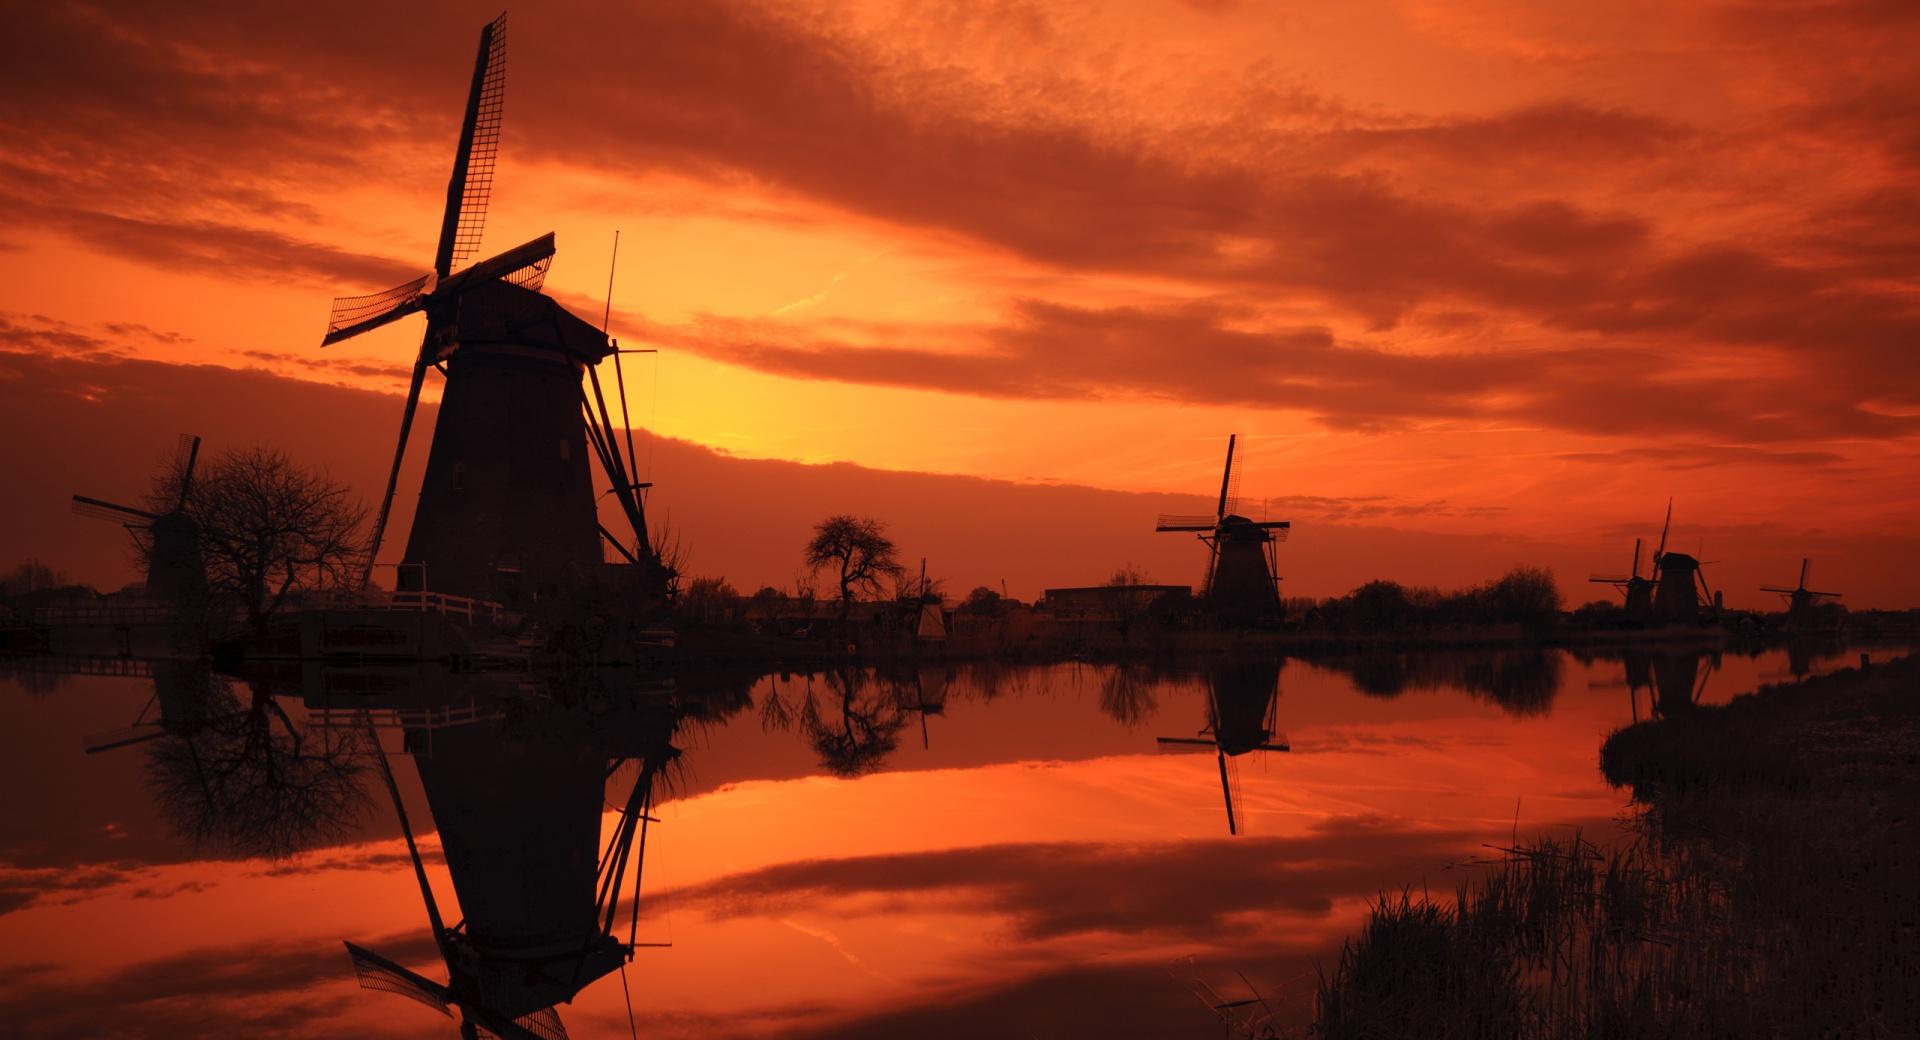 Evening Sky And Windmills wallpapers HD quality